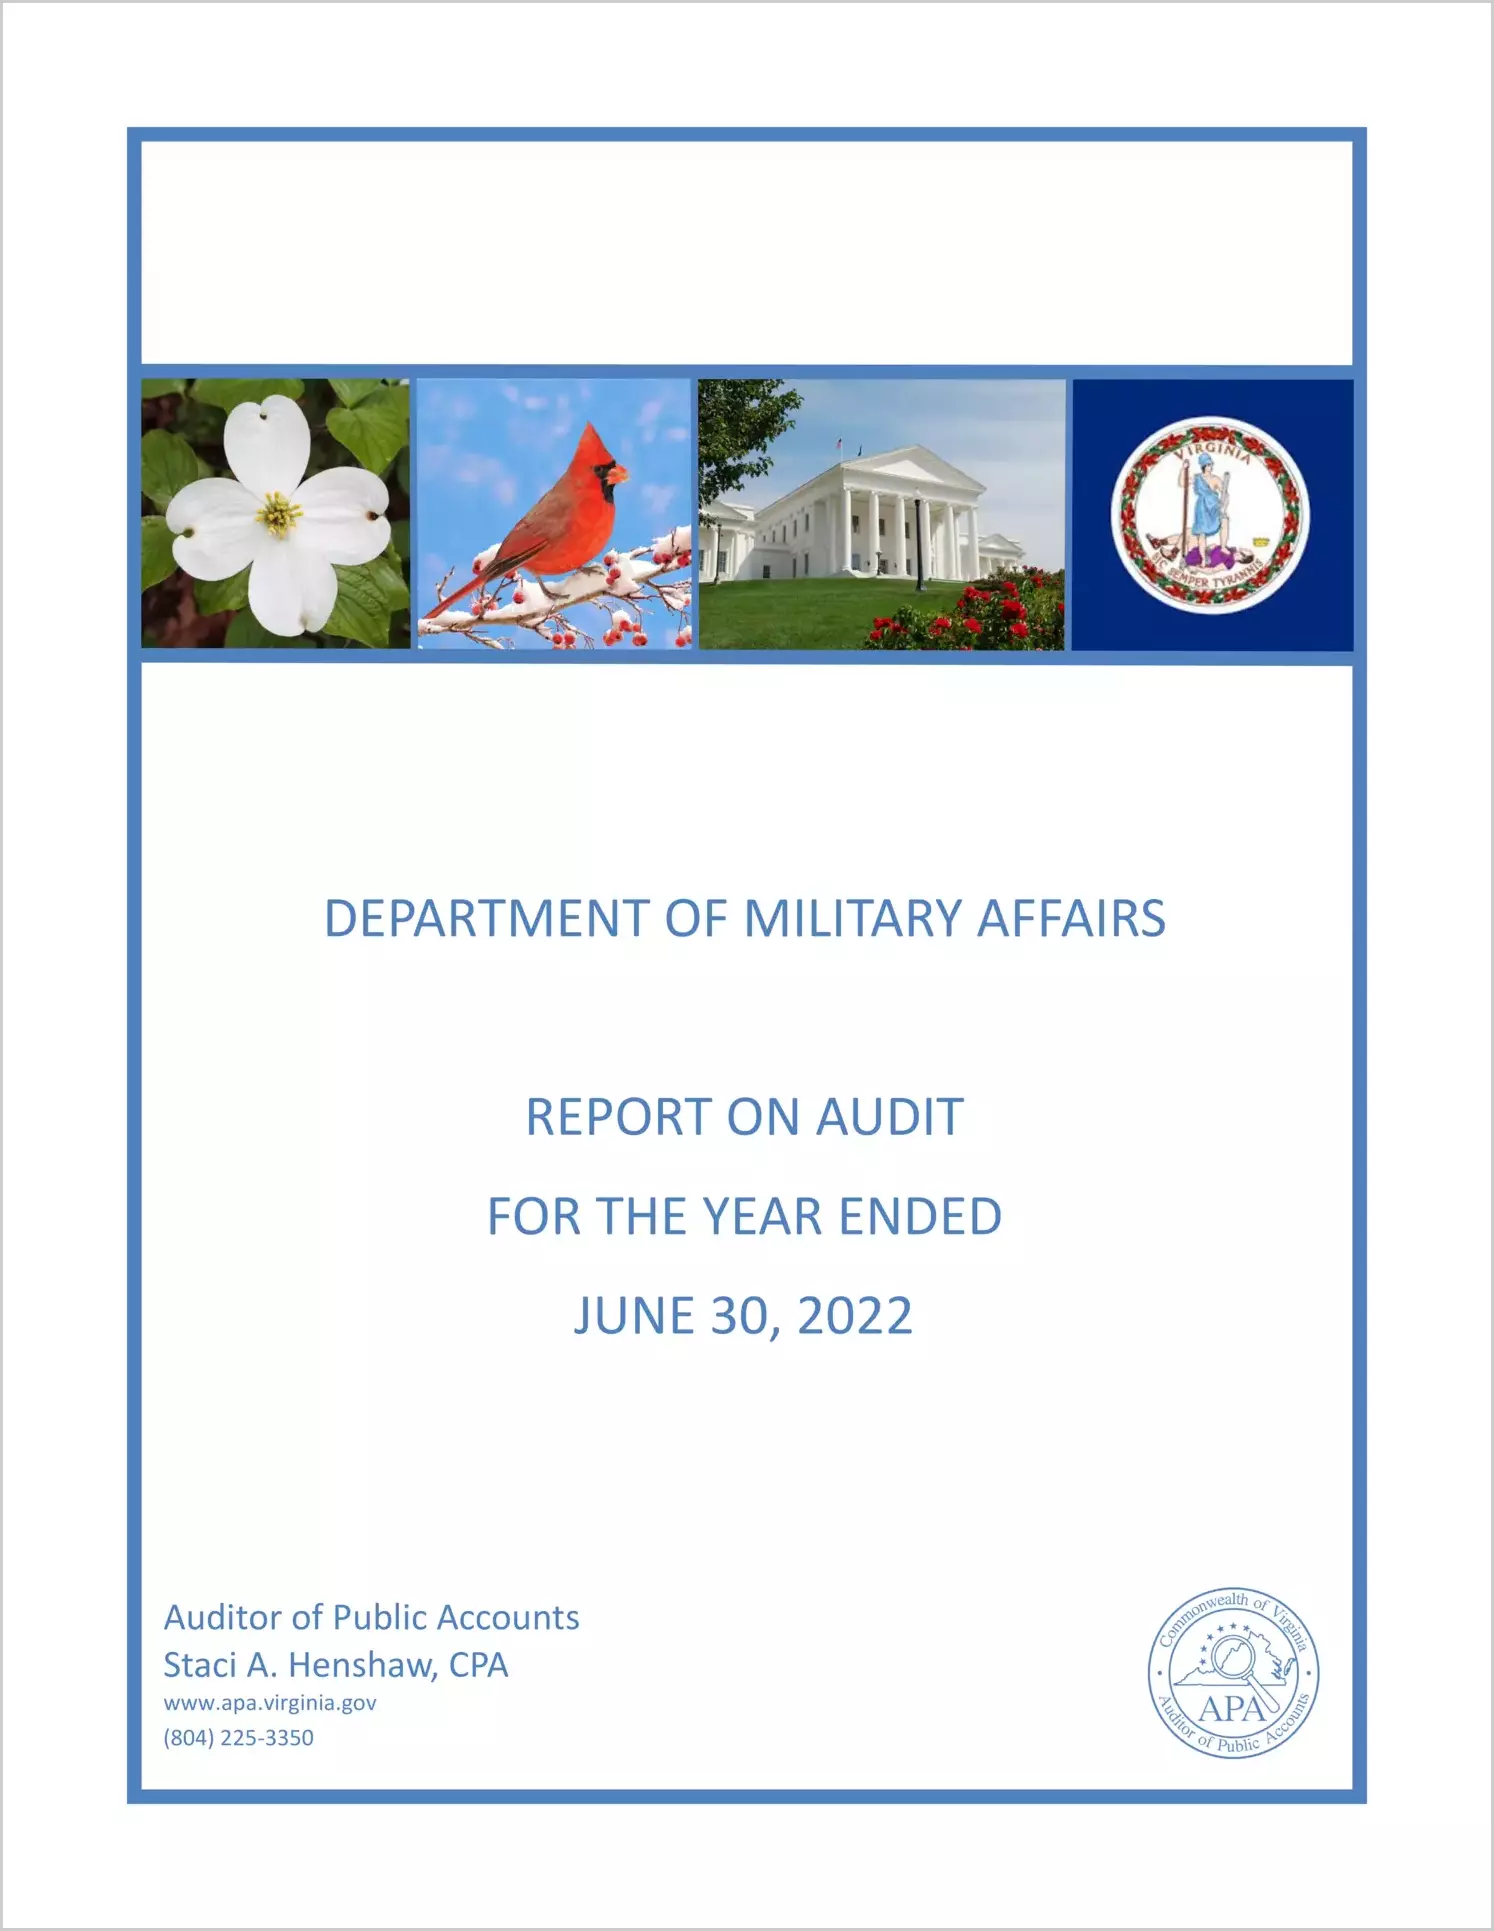 Department of Military Affairs for the year ended June 30, 2022